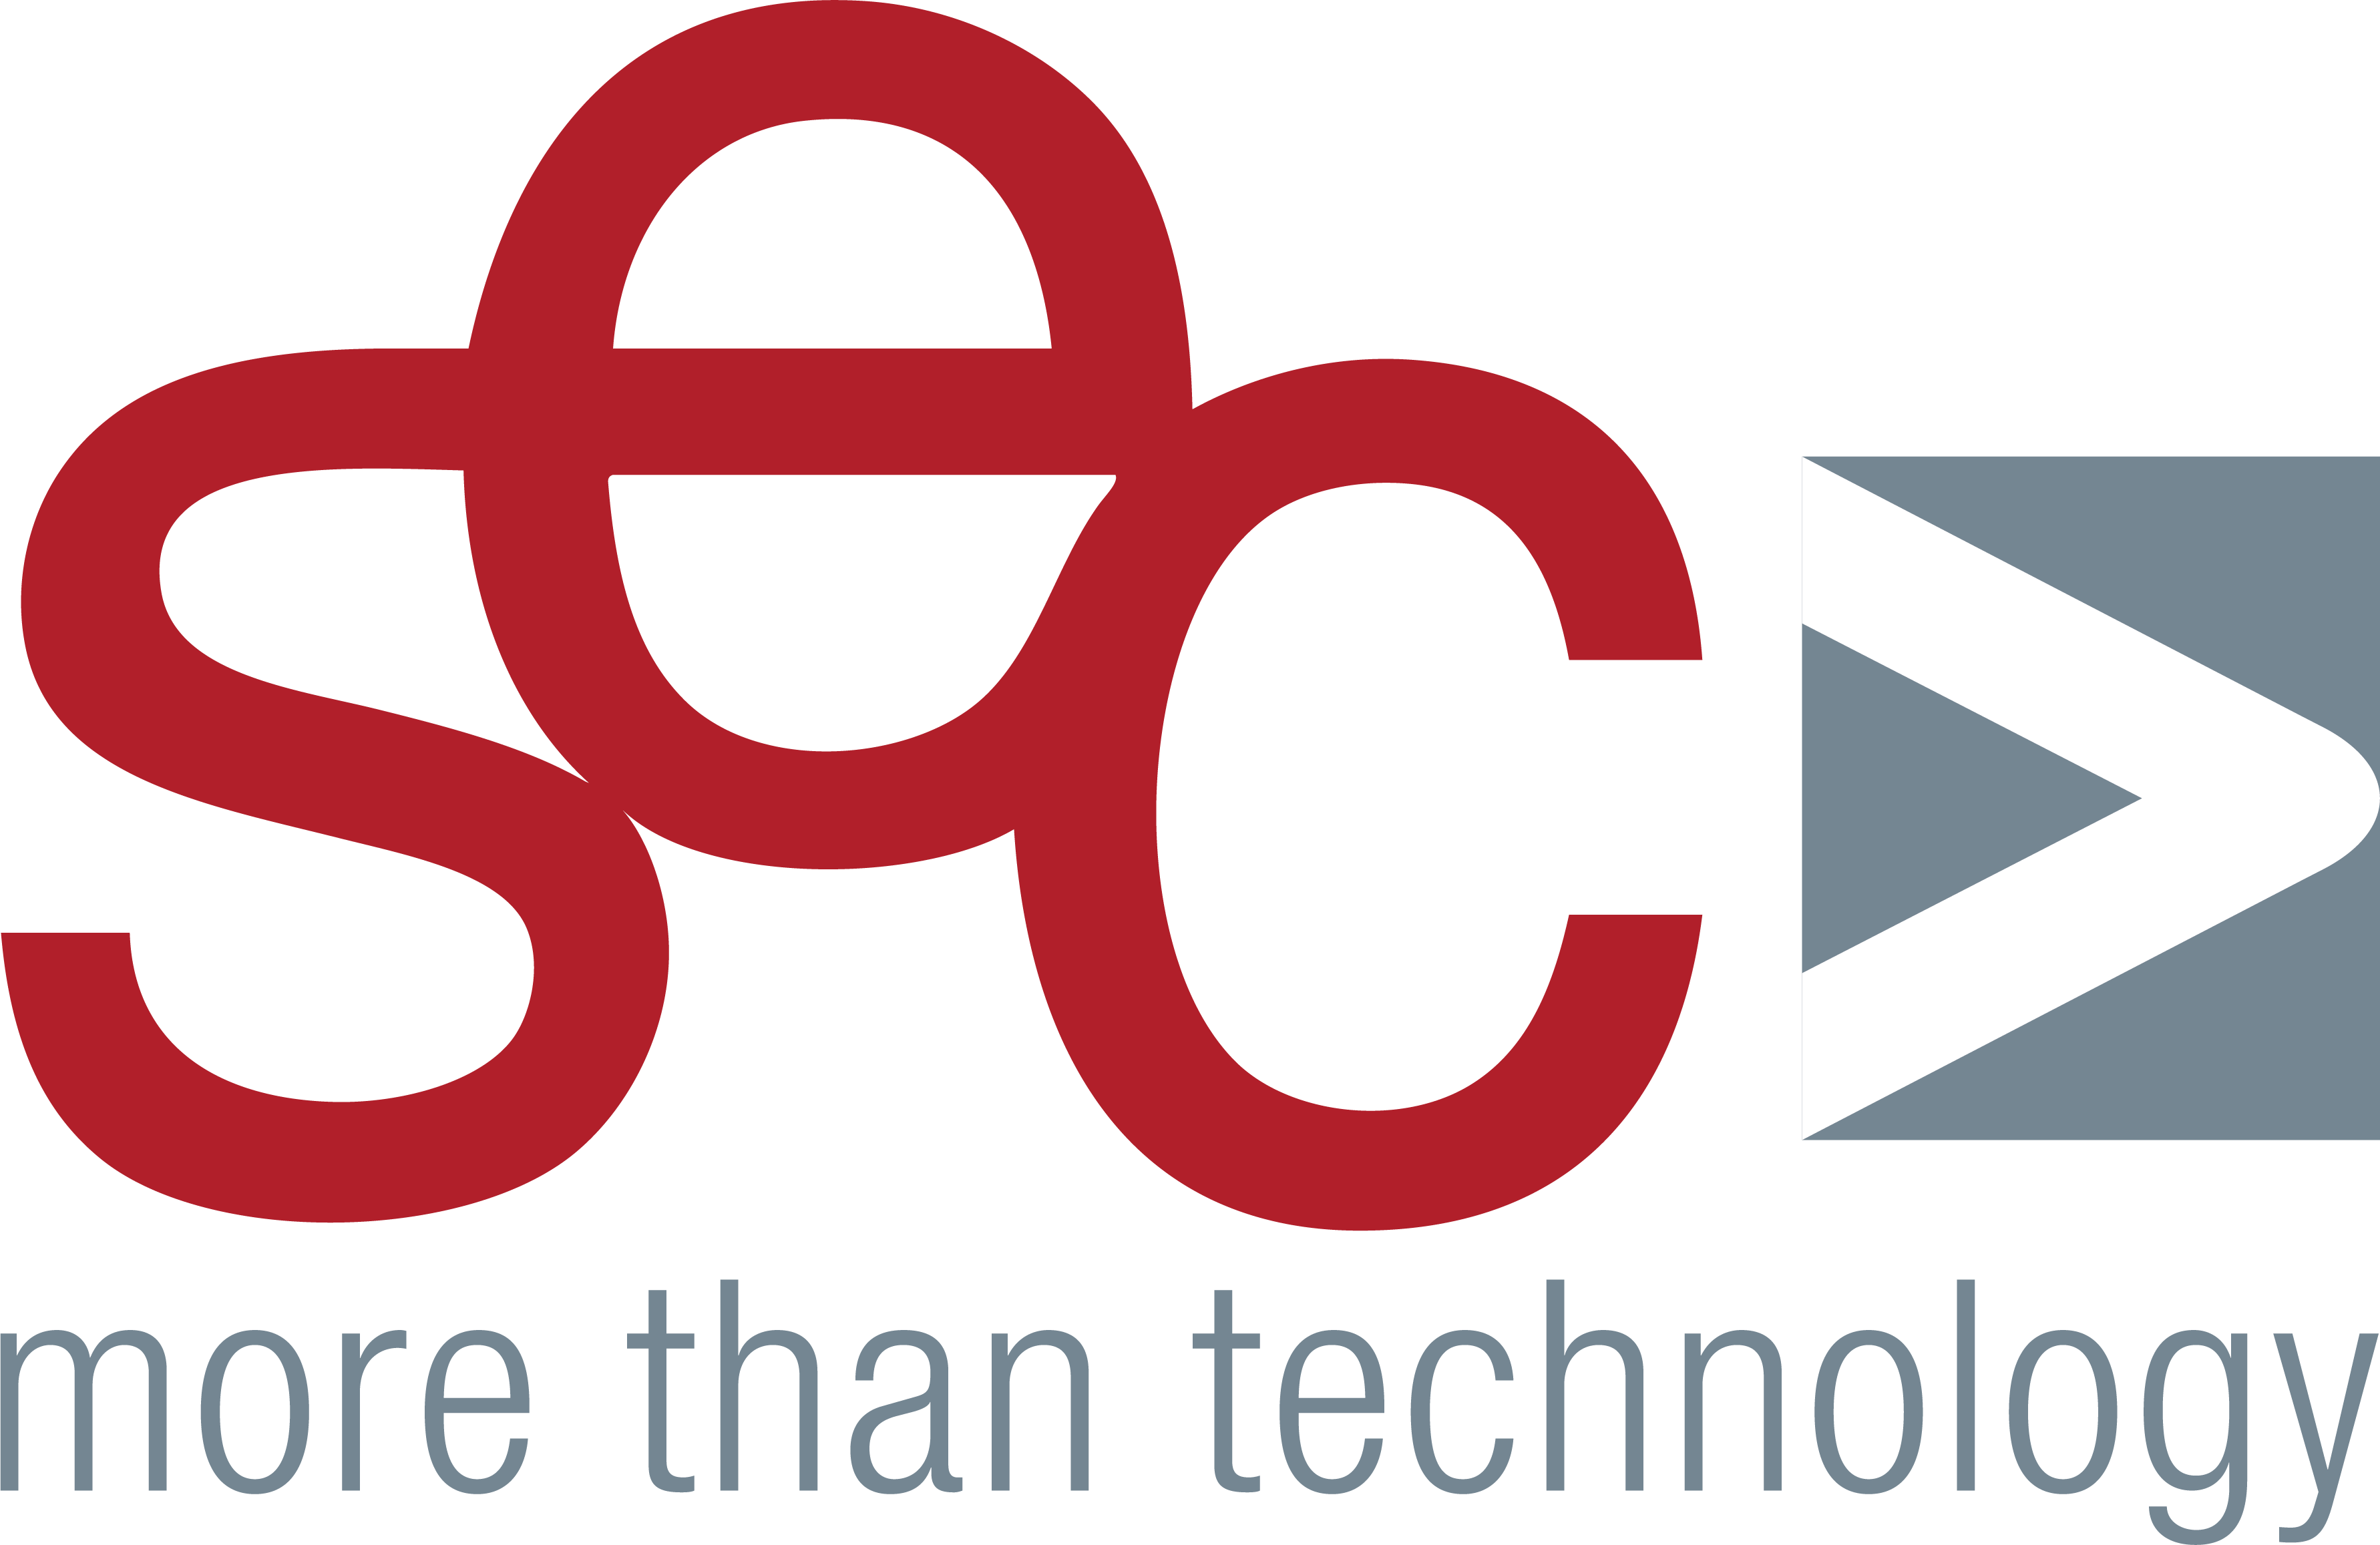 S.E.C. – System Engineering Consulting